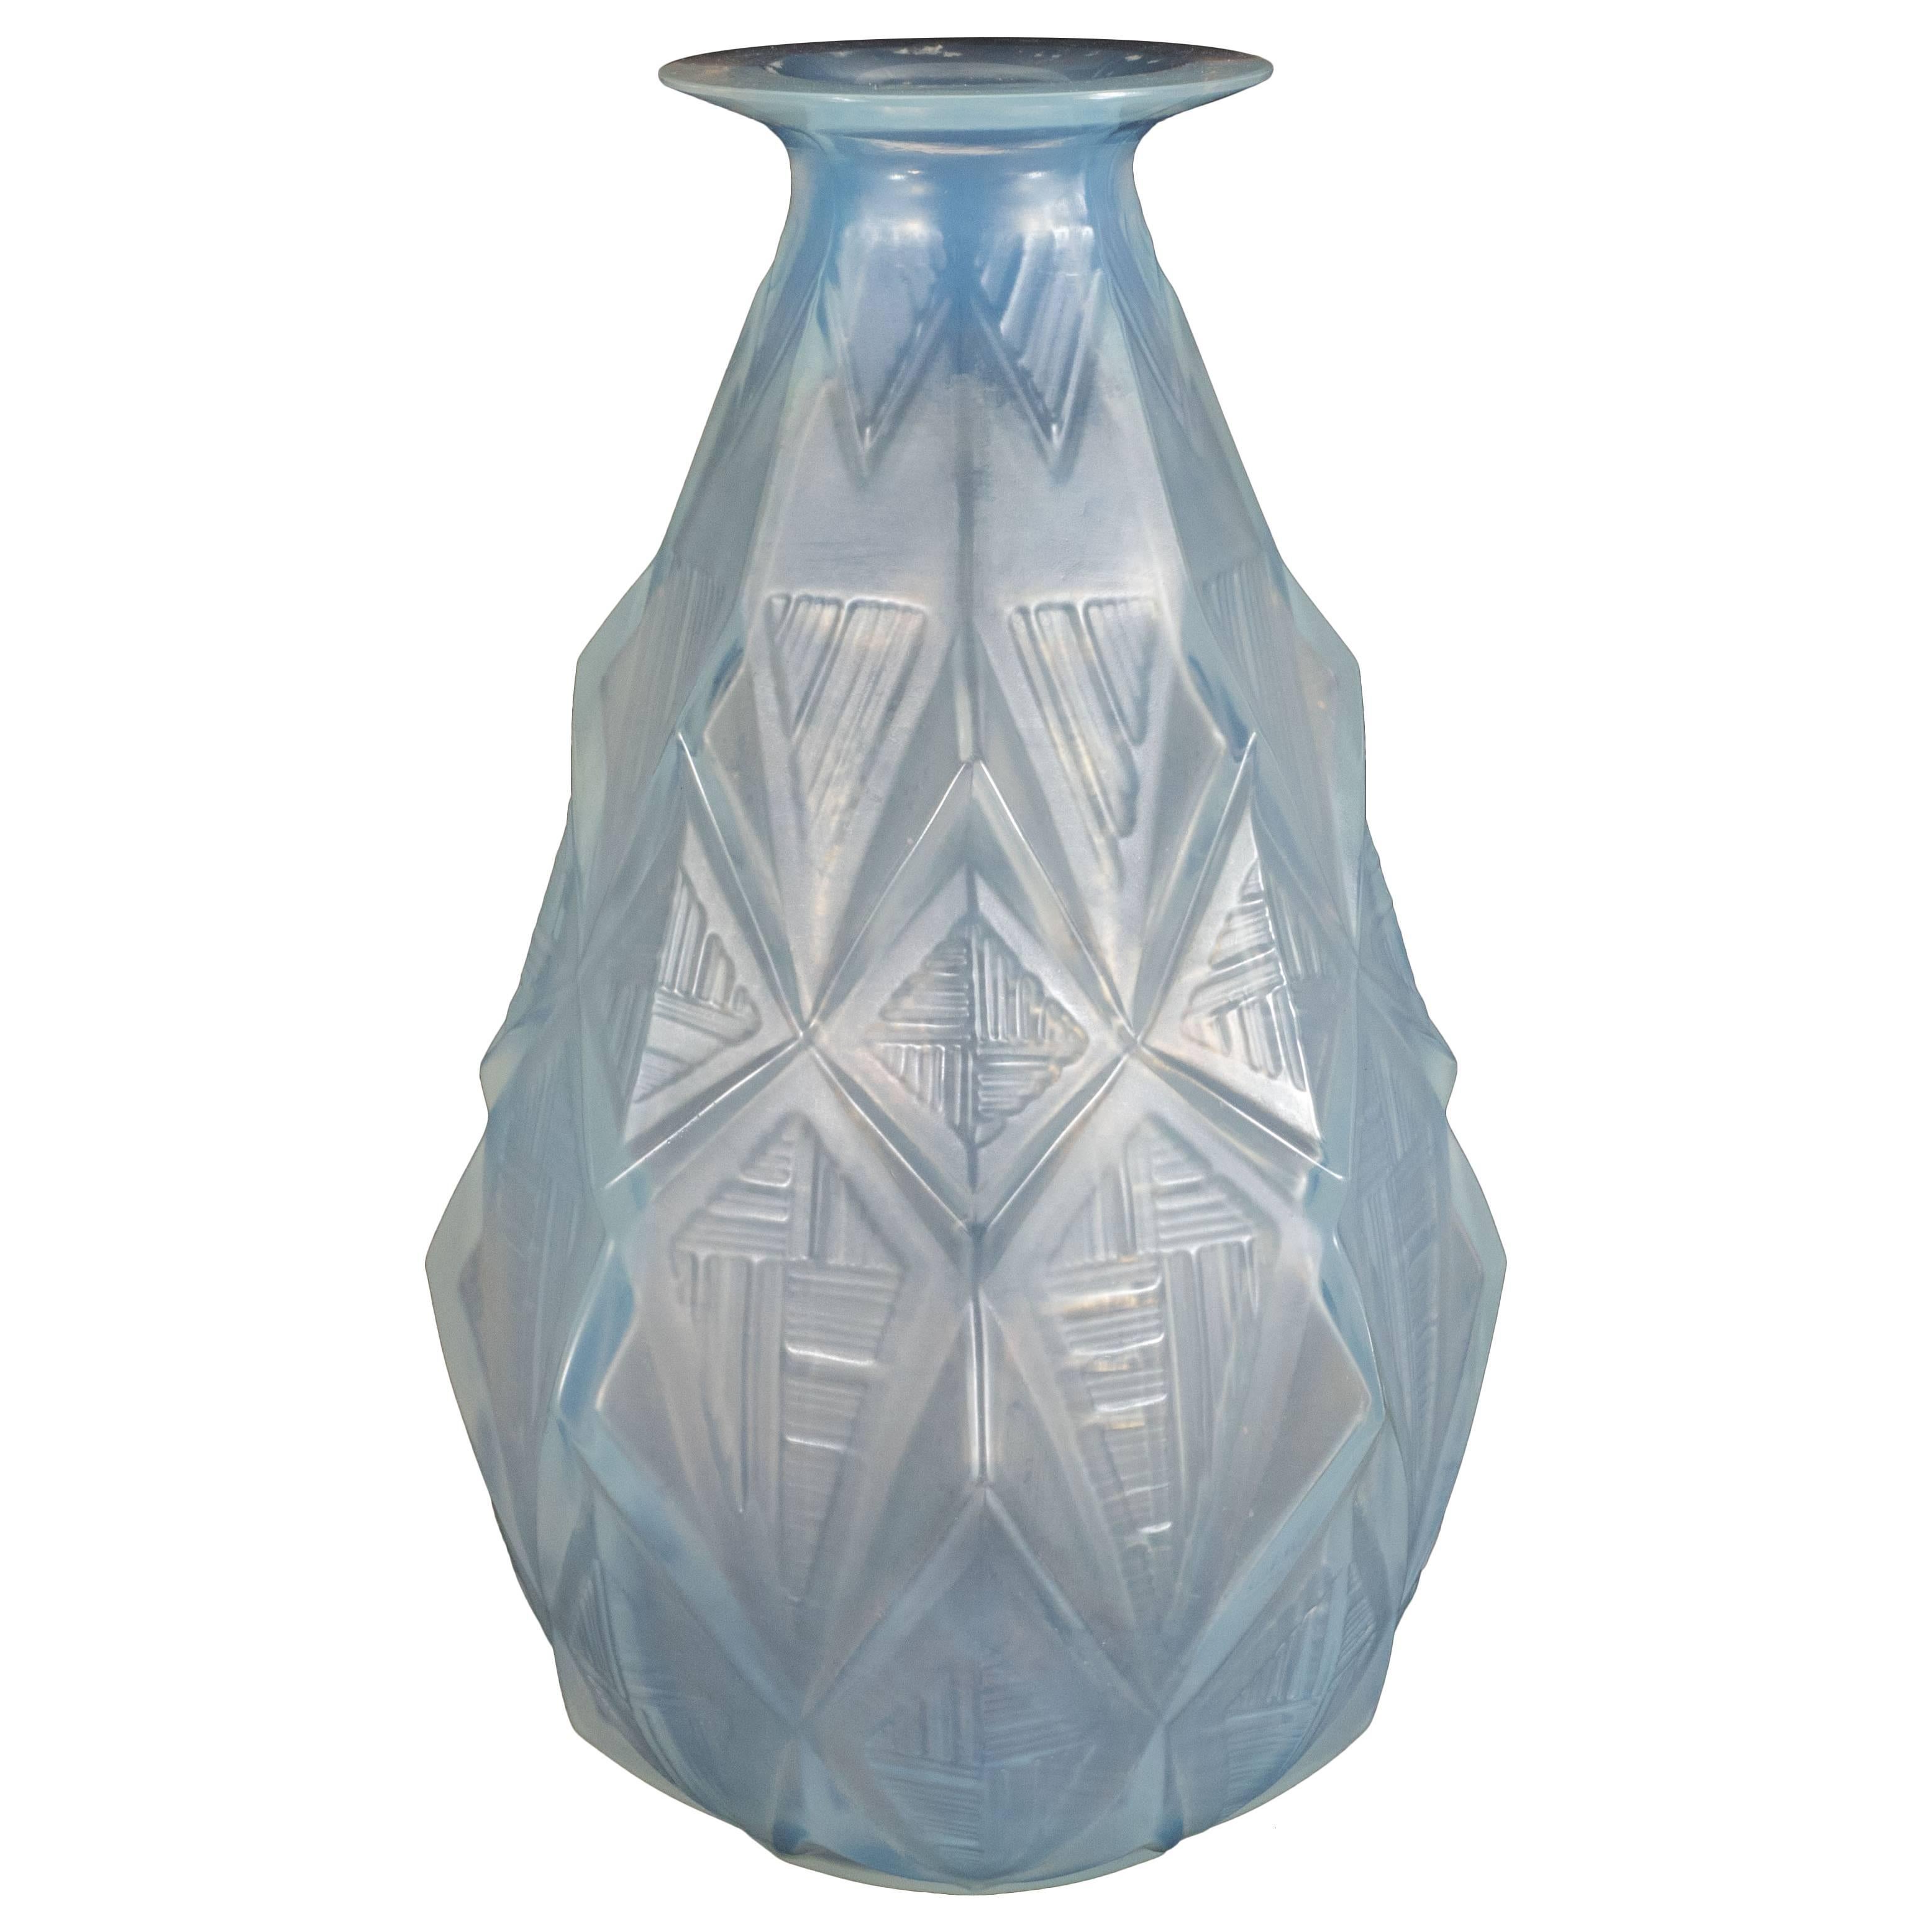 French Art Deco Opalescent Glass Vase with Raised Geometric Patterns by Sabino